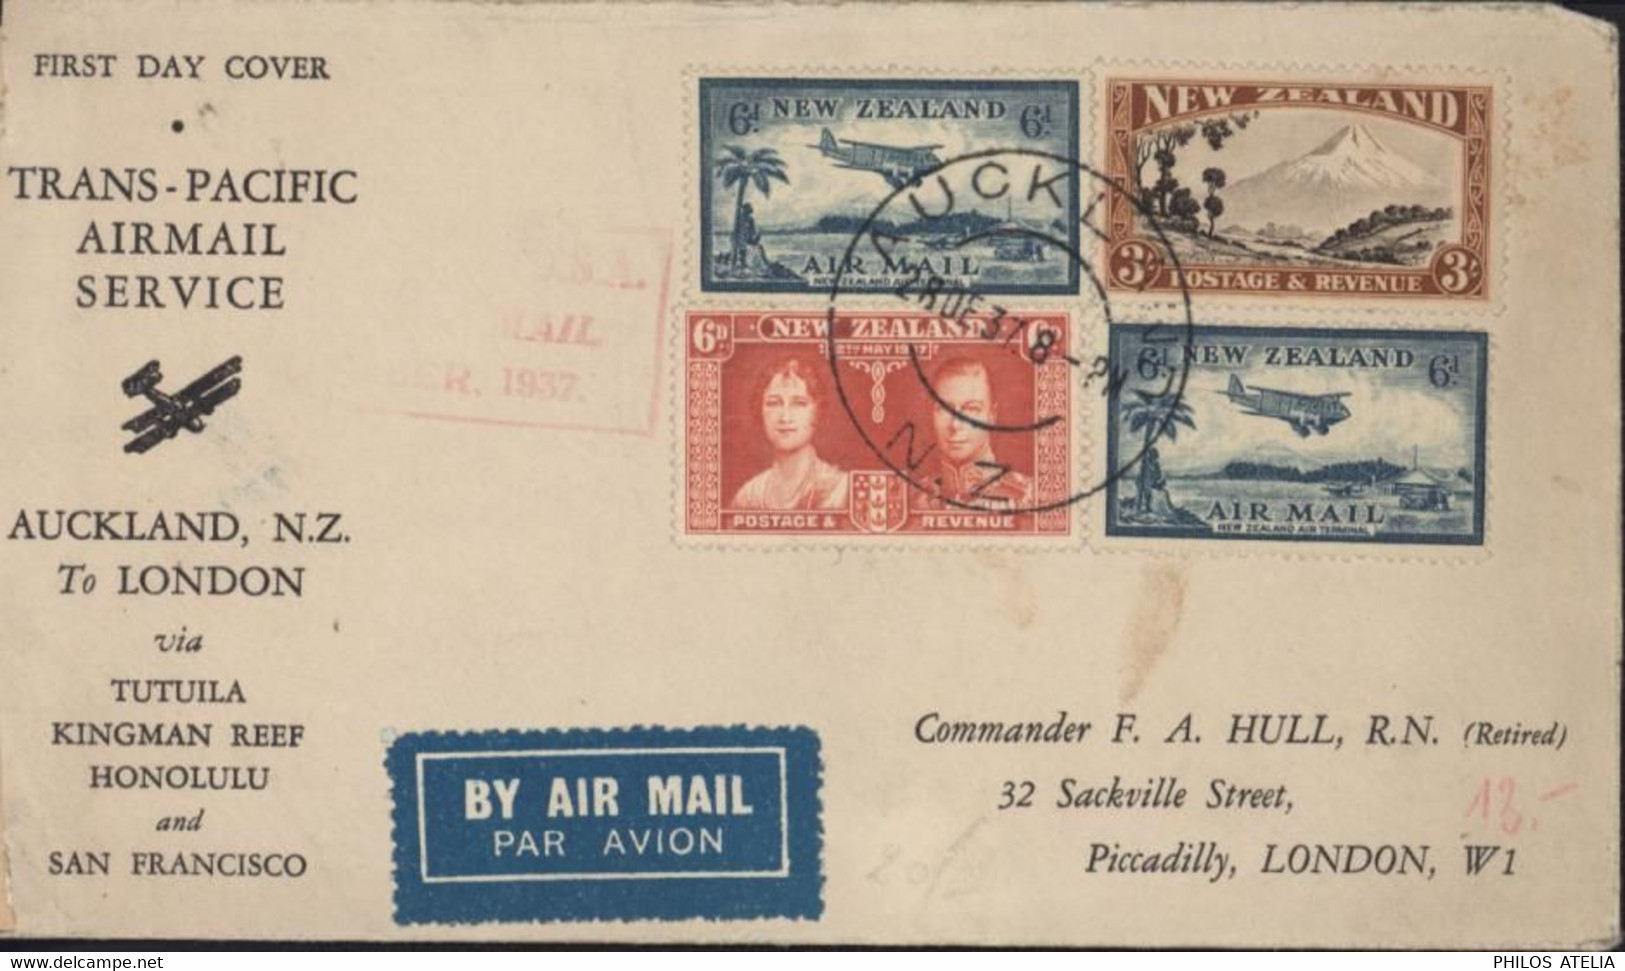 New Zealand By Air Mail FDC First Day Cover Trans Pacific Airmal Service Auckland To London CAD Auckland 28 DEC 37 - Luftpost